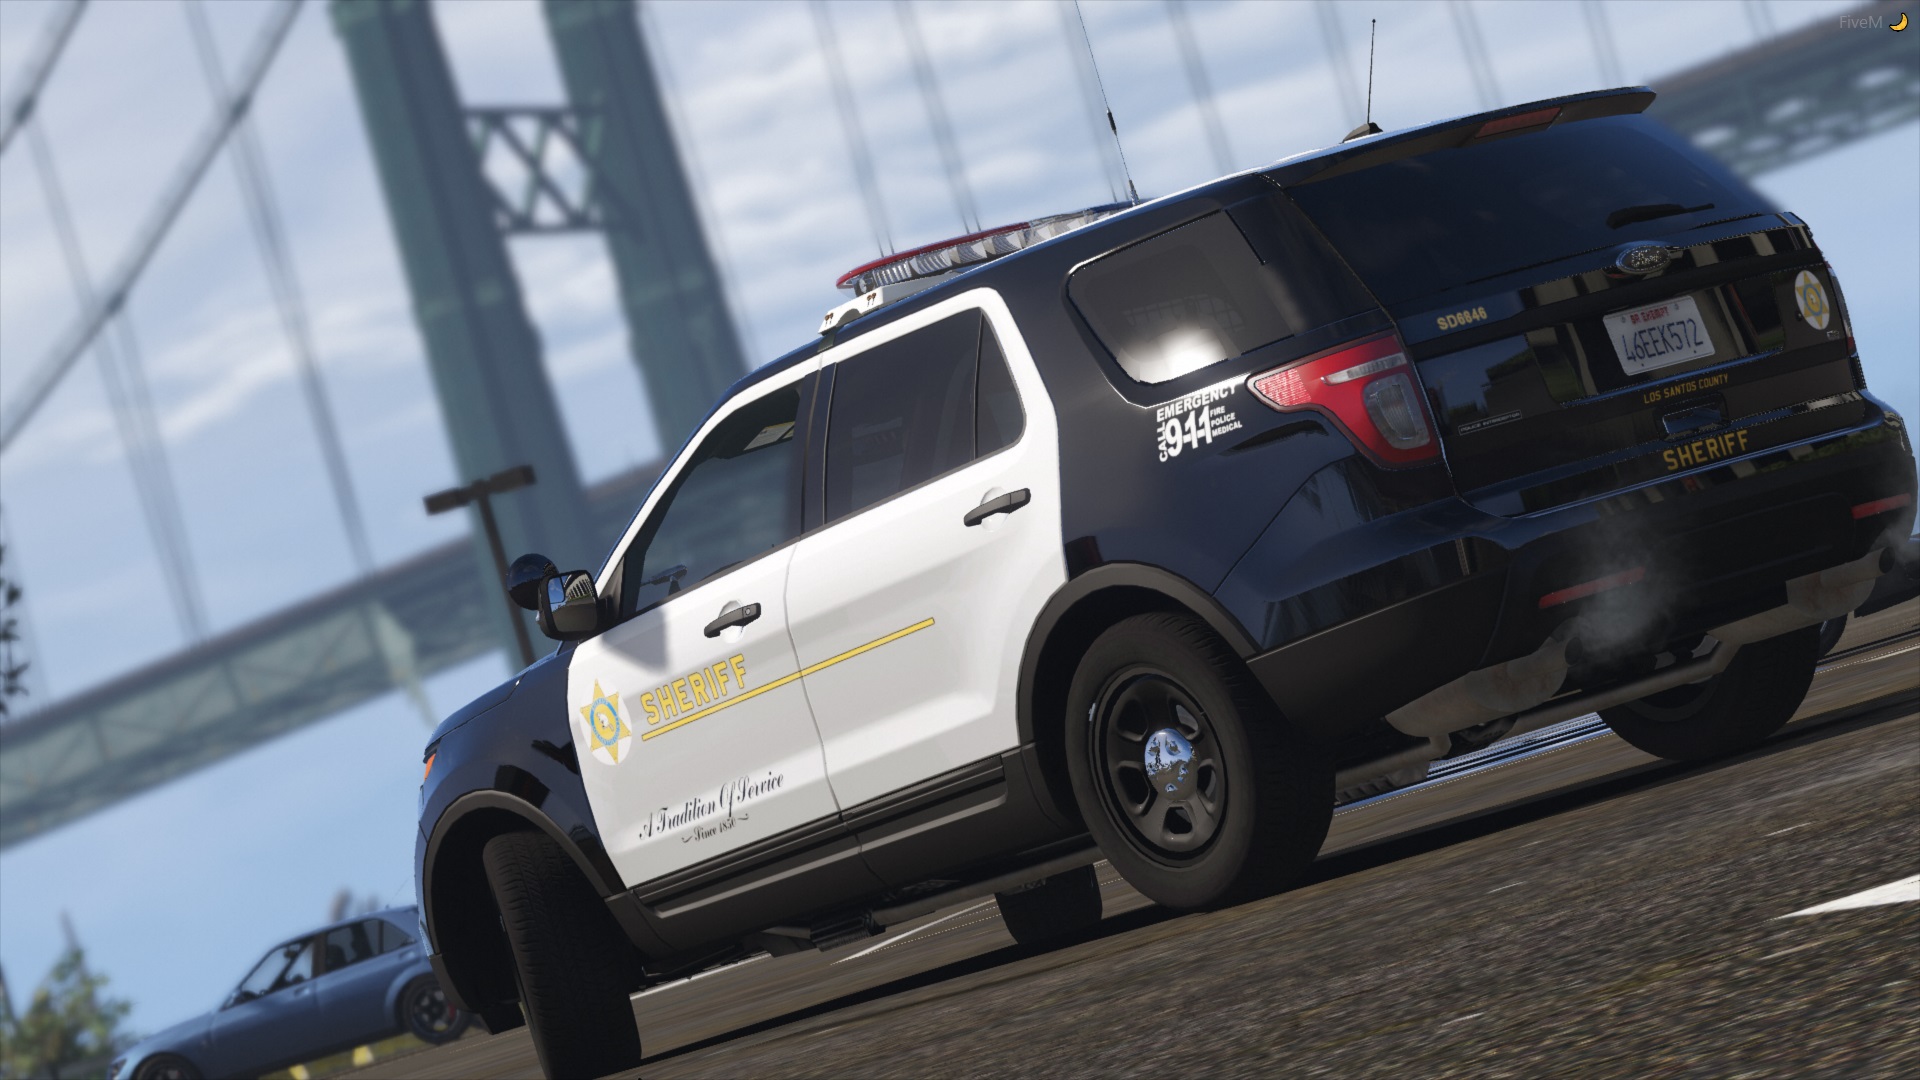 LASD & Ambient Occlusion Work Pt. 2